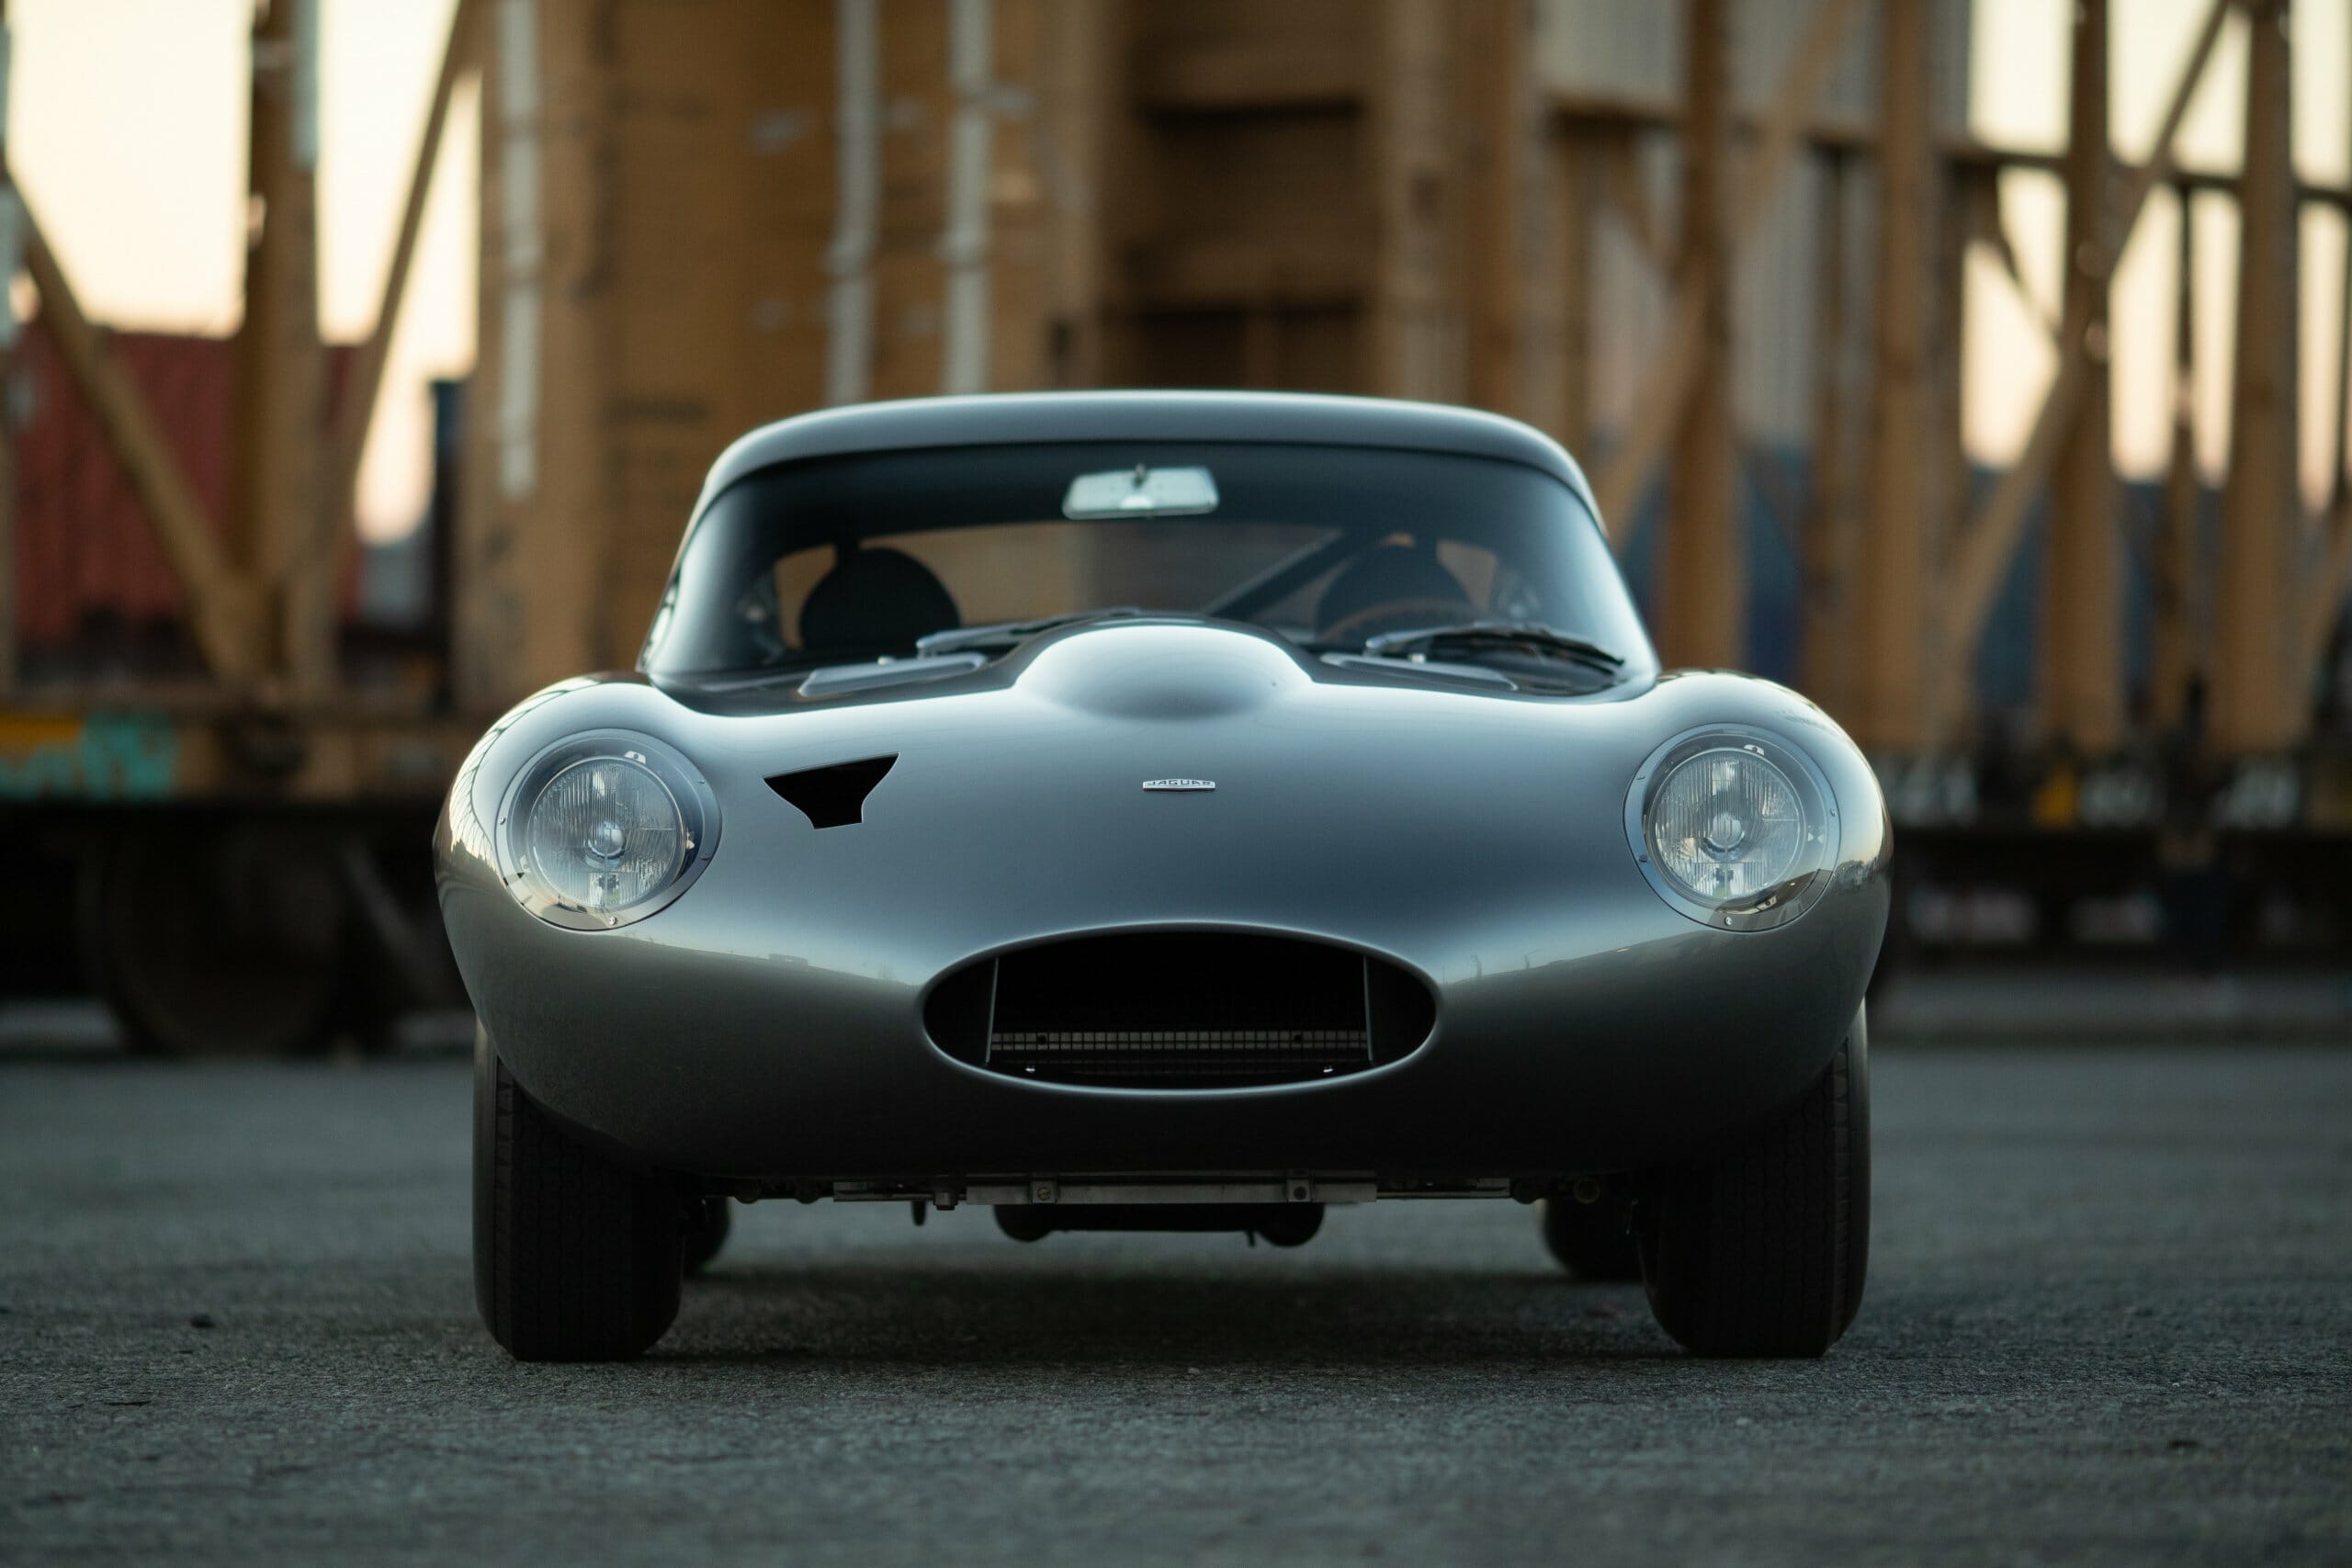 Jaguar E-type, This 1963 Jaguar E-type Low Drag Coupe re-creation is an 8-year labor of love, ClassicCars.com Journal